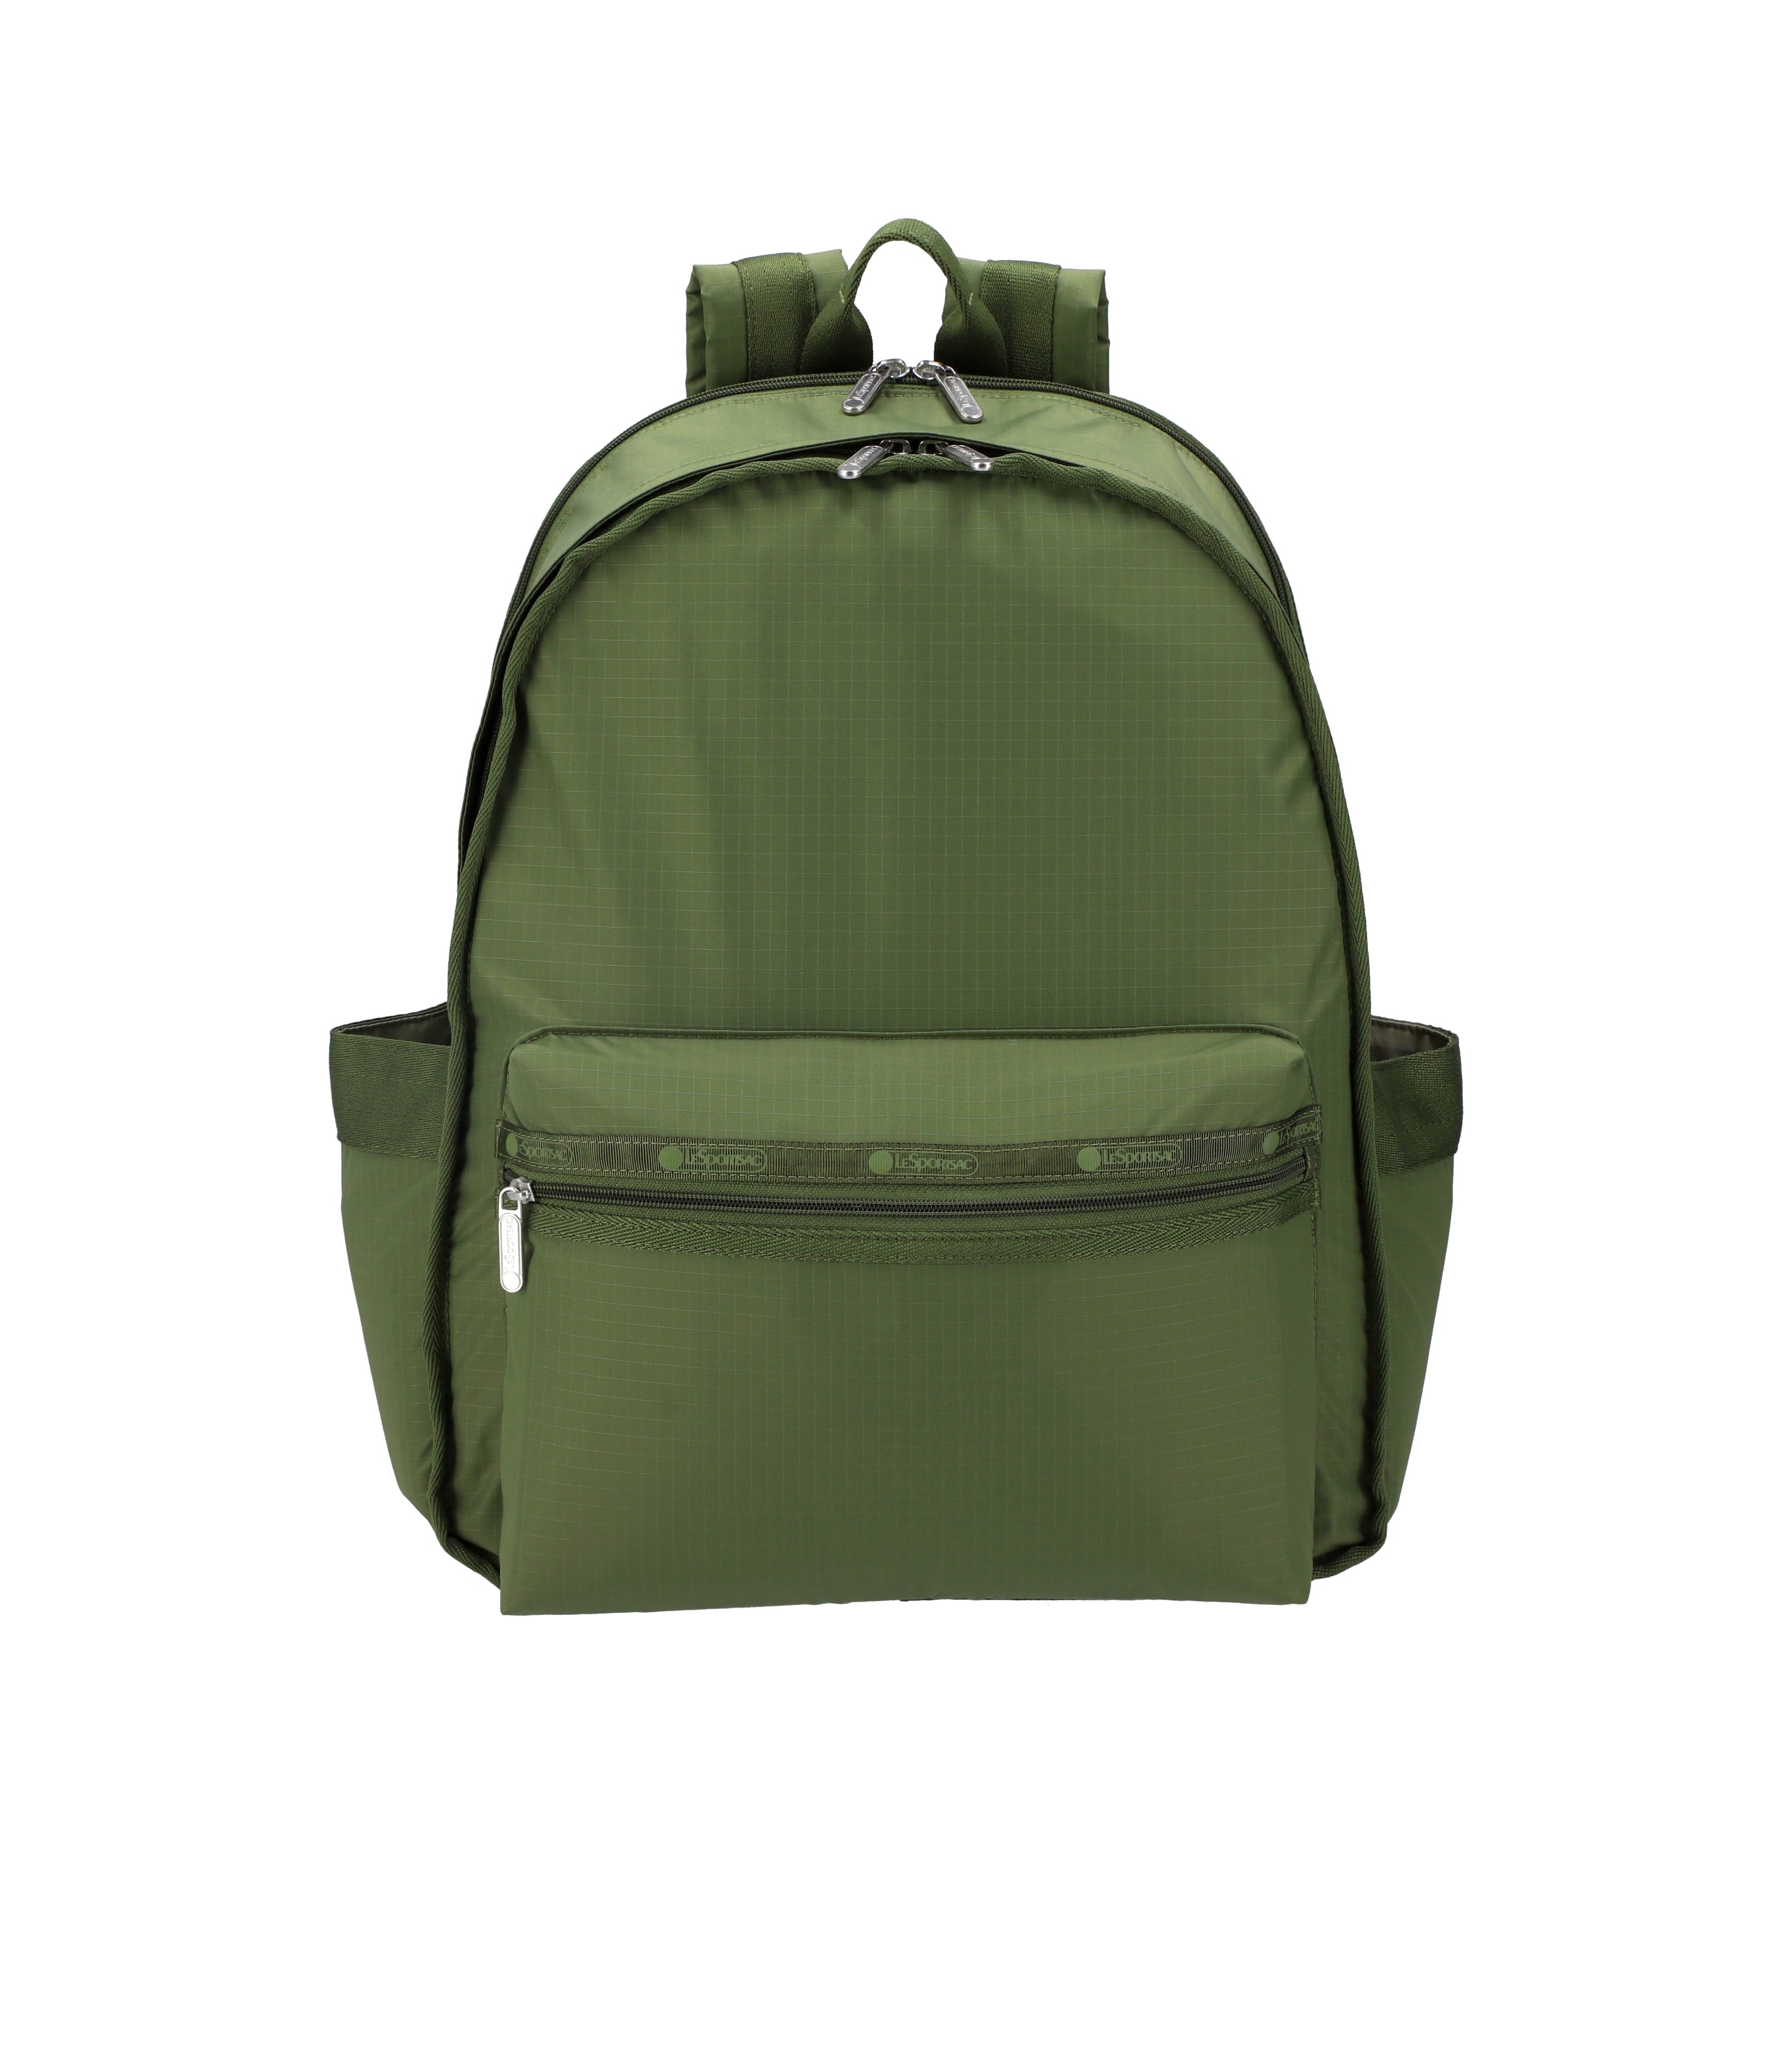 Route Backpack - Olive solid